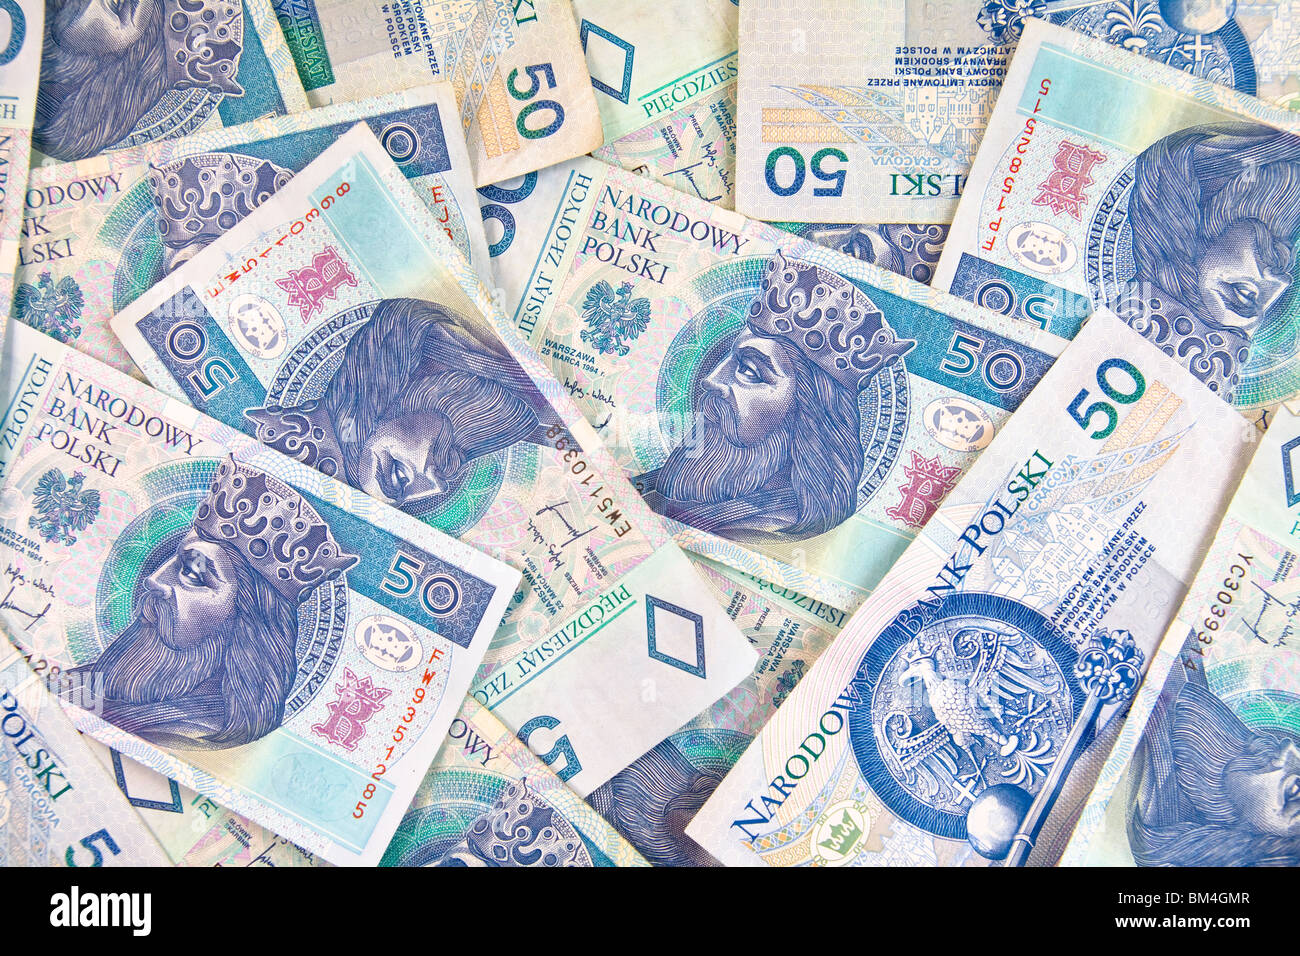 Money background. Banknotes from Poland. Financial texture abstract. Stock Photo